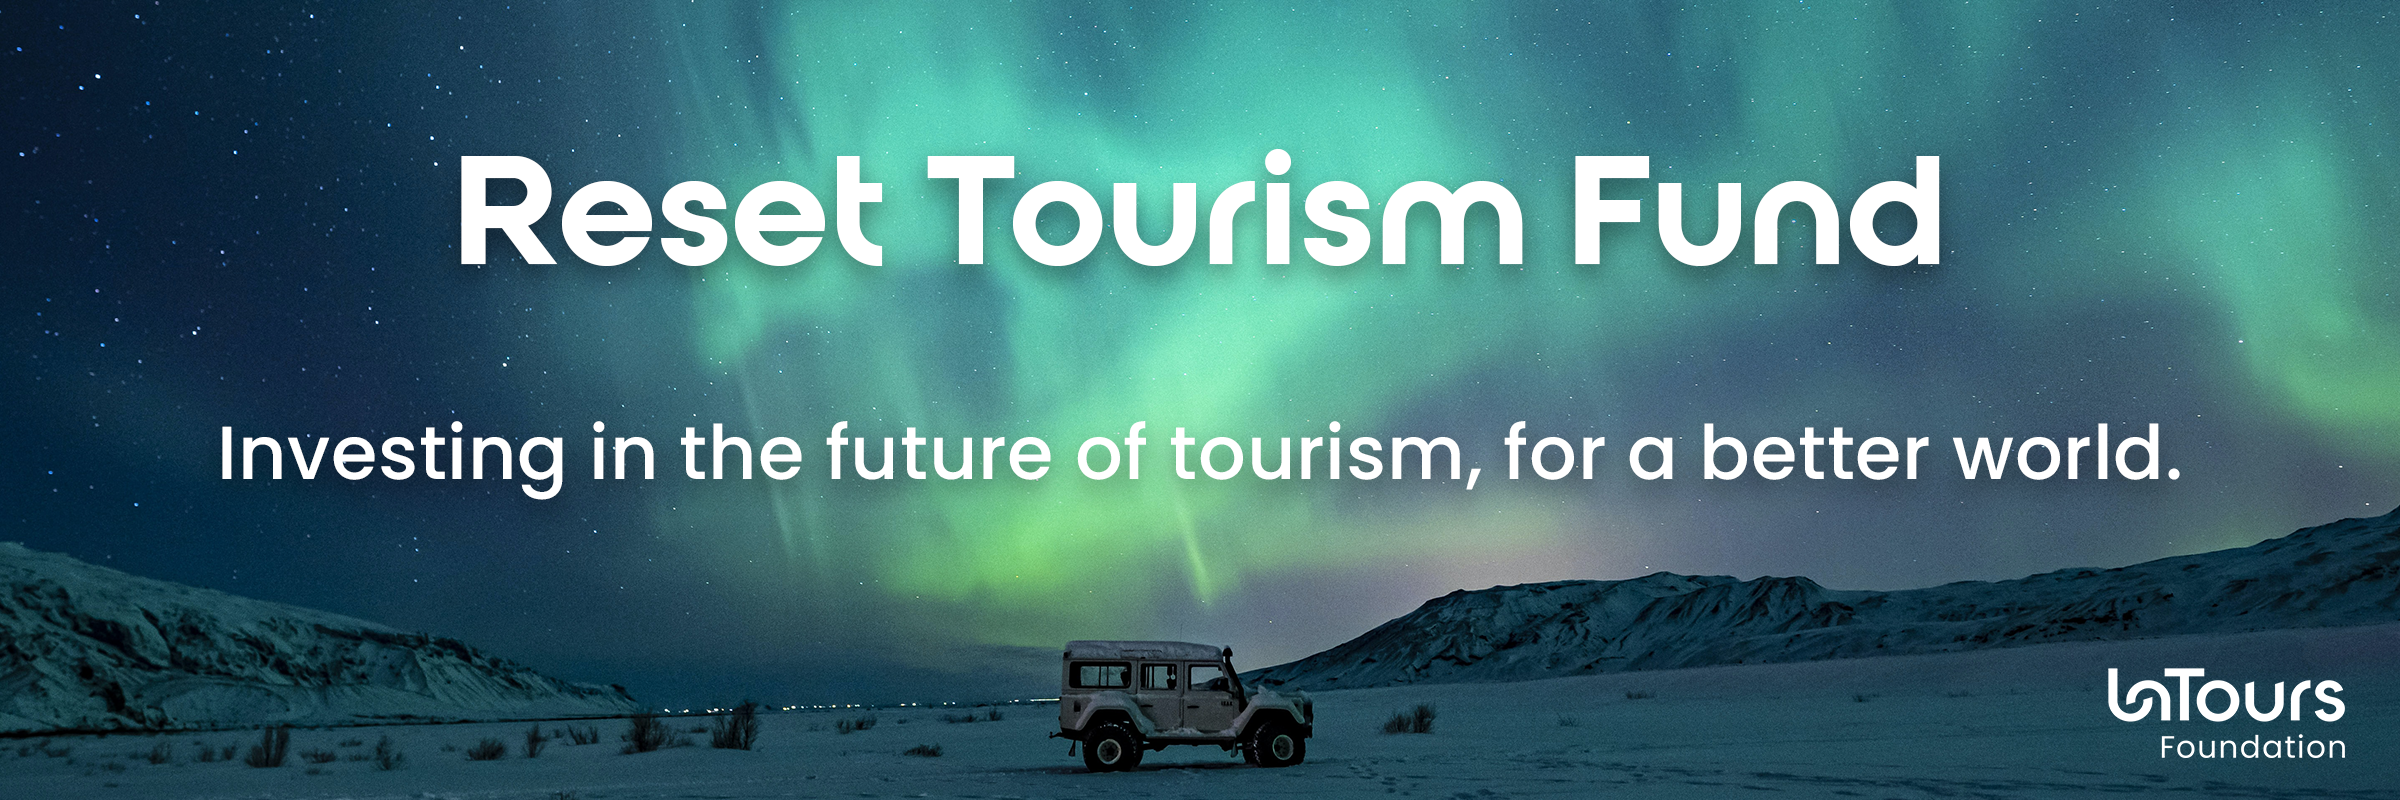 BANNER: Funding for small businesses - Reset Tourism Fund - Investing in the future of tourism, for a better world.